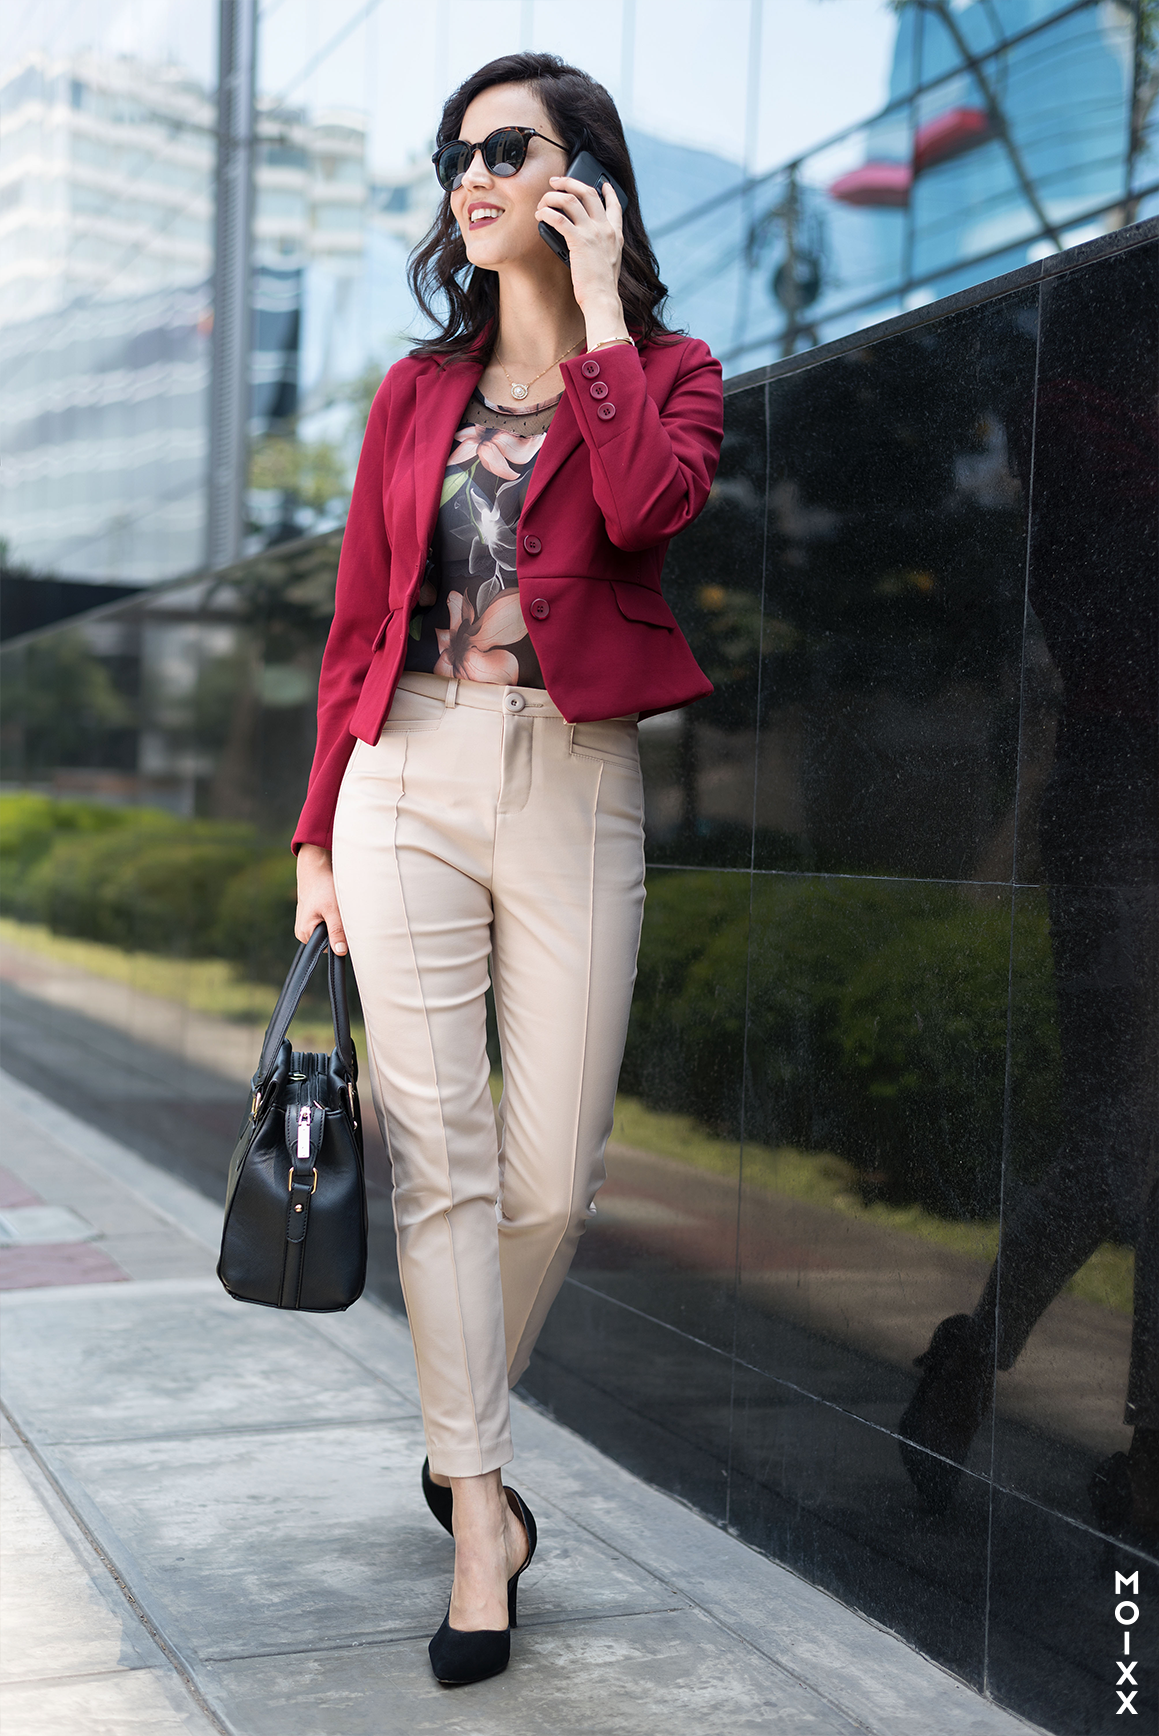 5 OUTFITS TO WEAR TO THE OFFICE FROM MONDAY TO FRIDAY – MOIXX